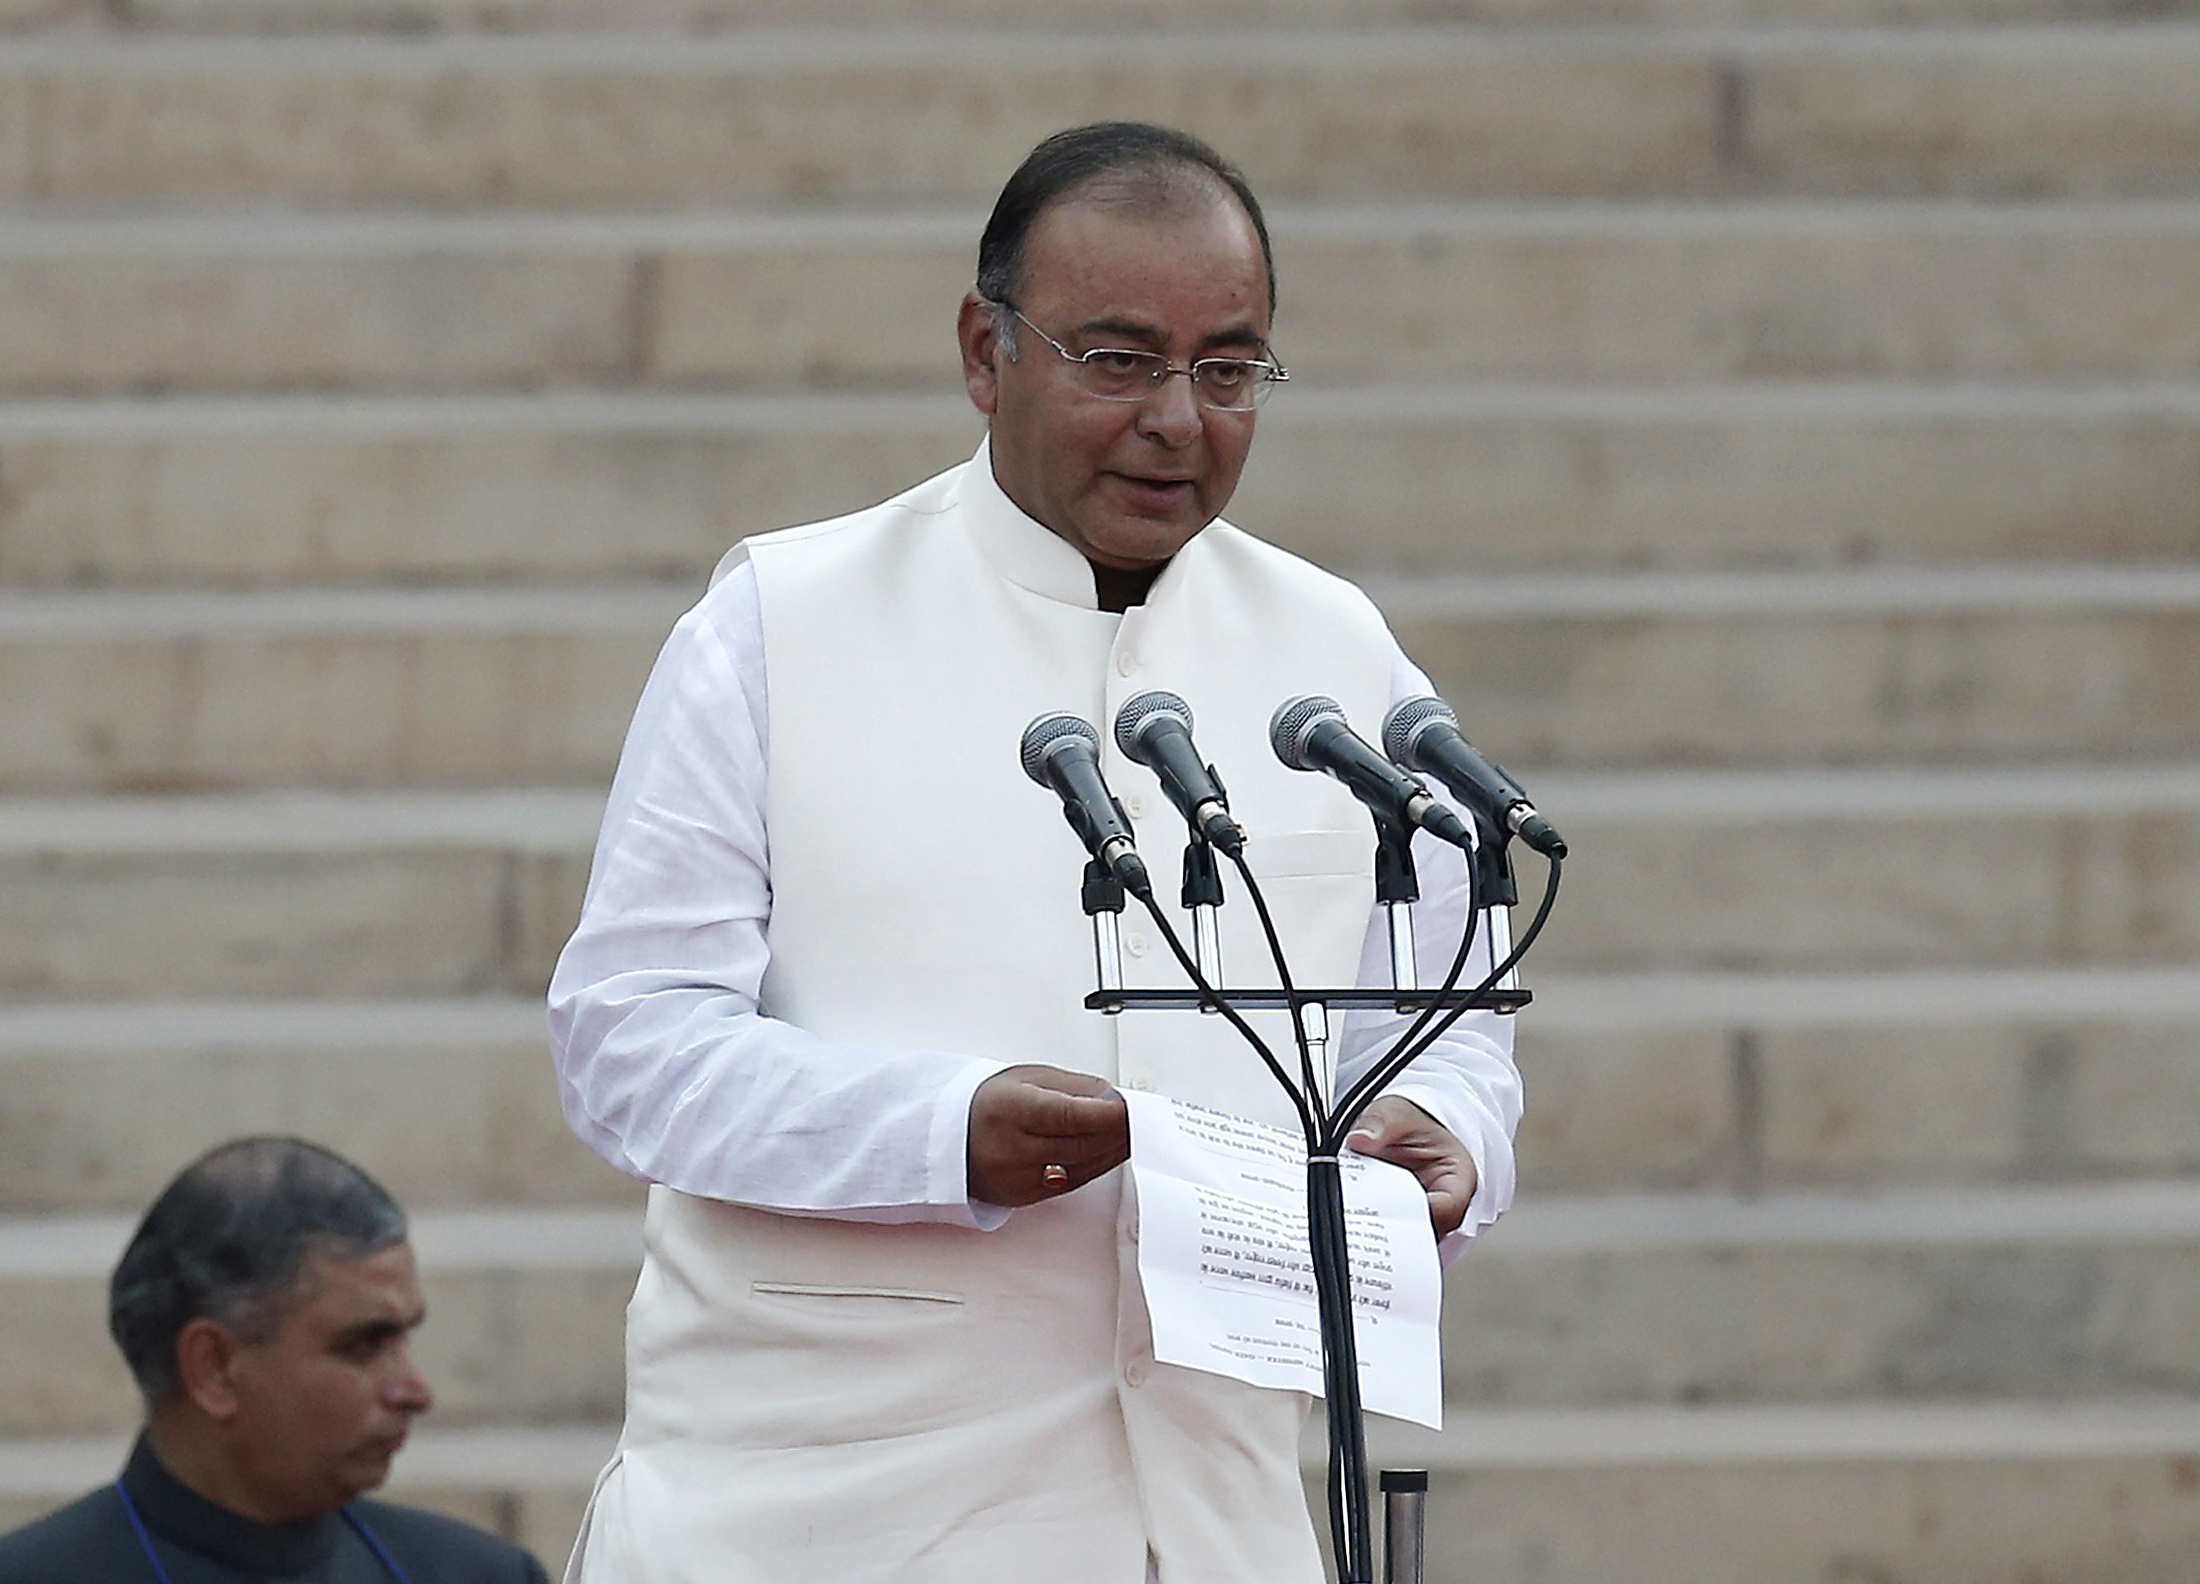 Arun Jaitley takes the oath of office as the country's new Finance Minister at the presidential palace in New Delhi on May 26, 2014 (Adnan Abidi/Reuters—Reuters)